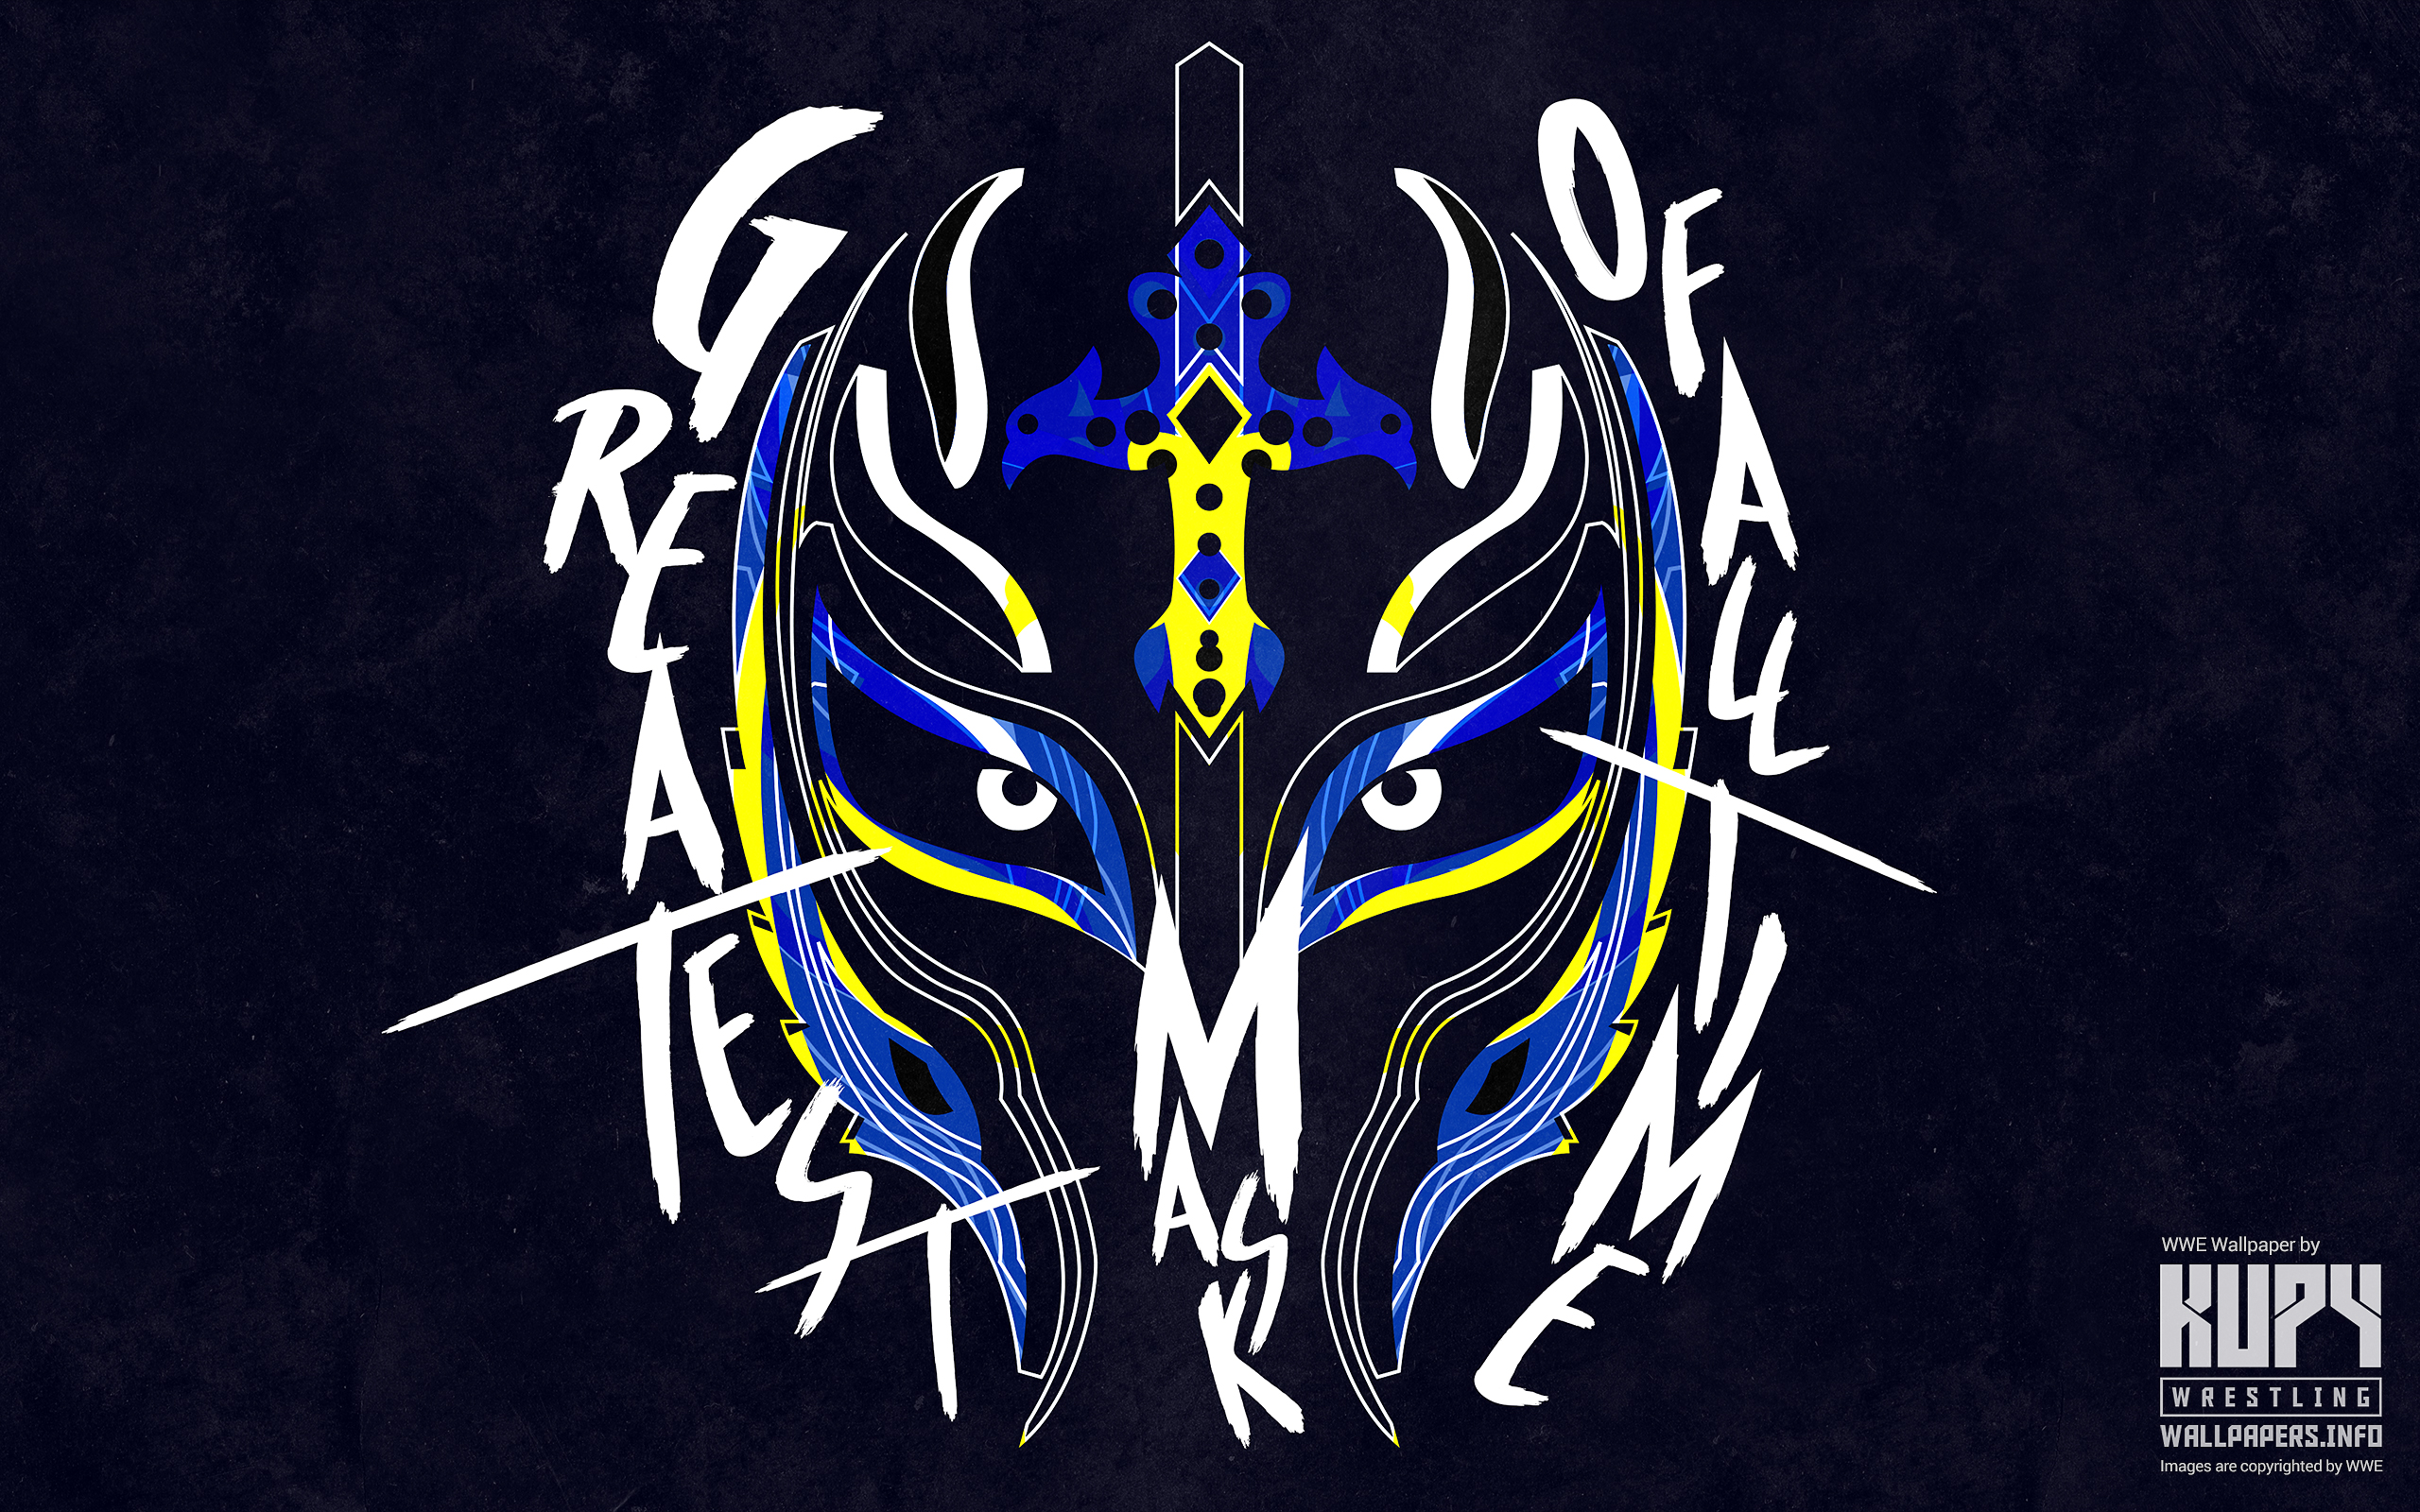 Kupy Wrestling Wallpapers The Latest Source For Your Wwe Wrestling Wallpaper Needs Mobile Hd And 4k Resolutions Available Rey Mysterio Archives Kupy Wrestling Wallpapers The Latest Source For Your